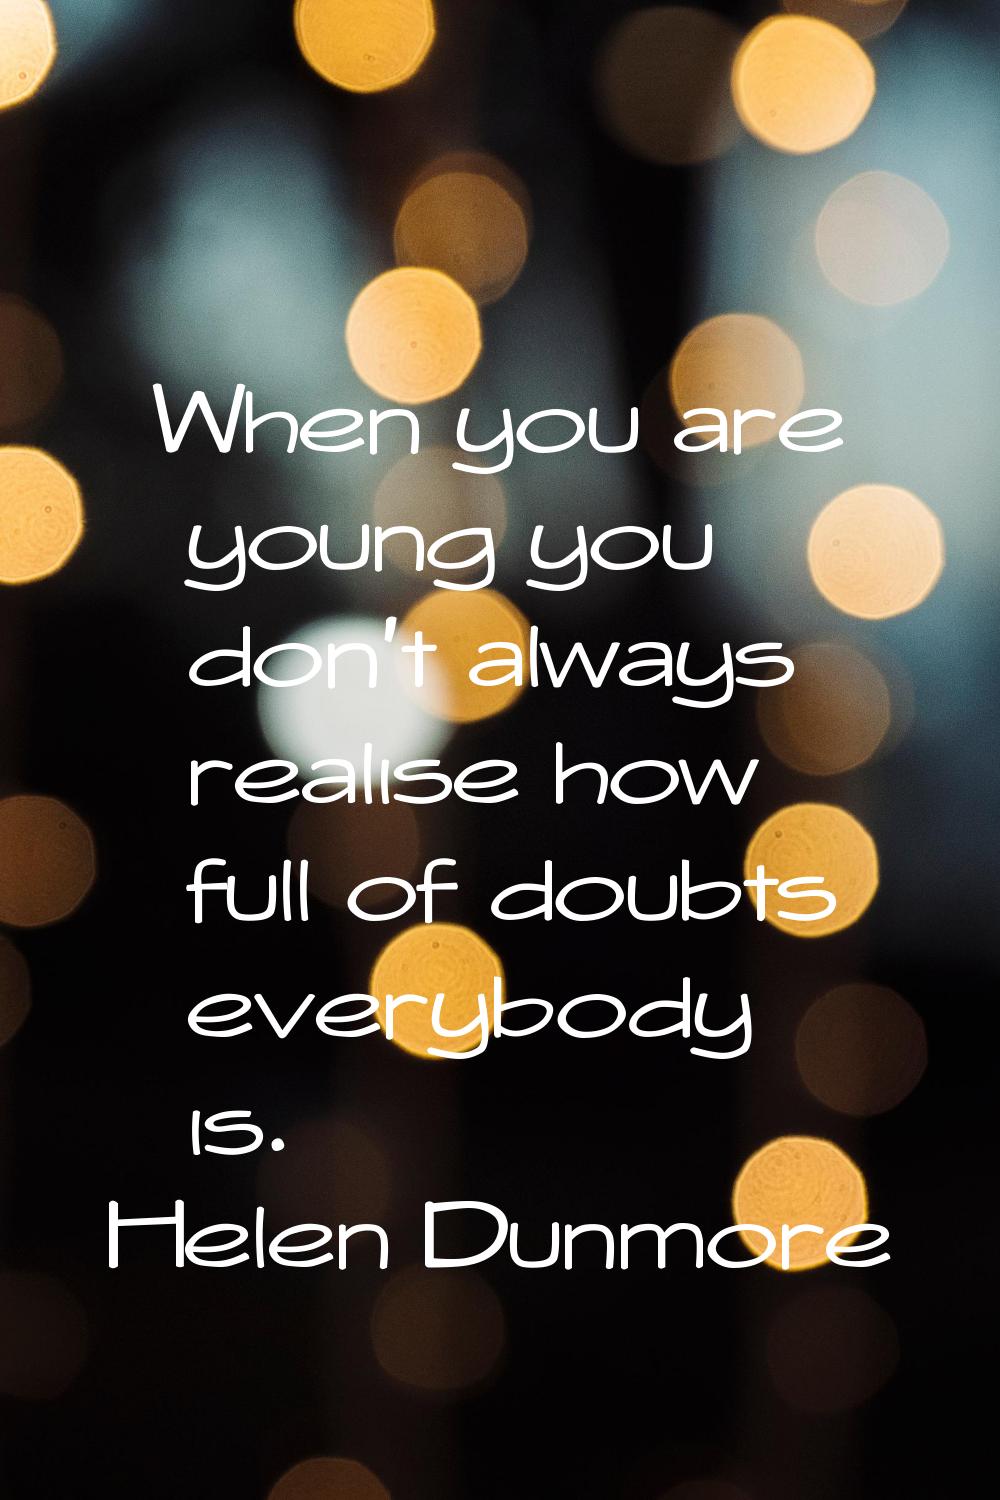 When you are young you don't always realise how full of doubts everybody is.